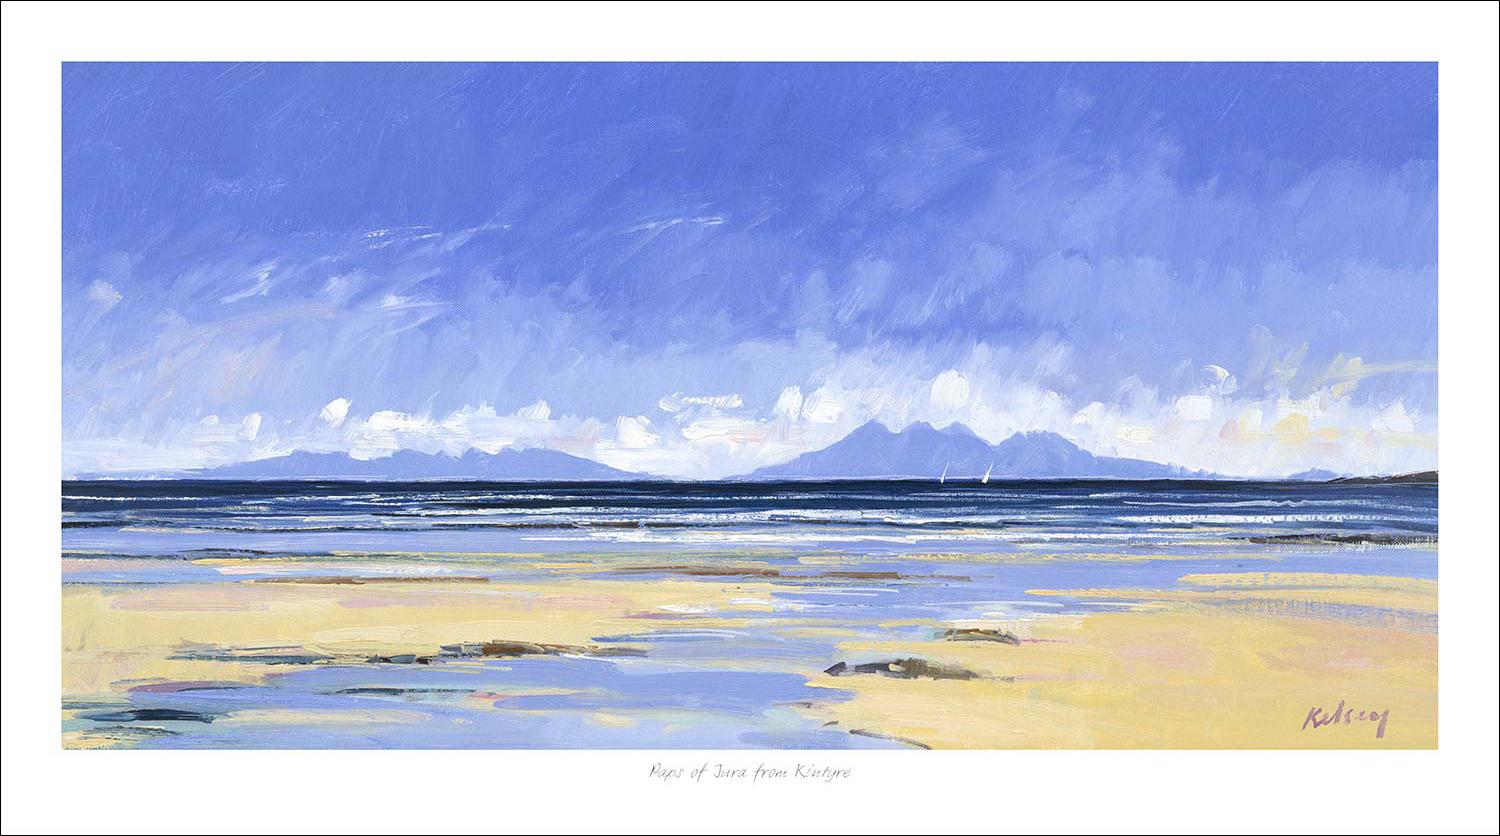 The Paps of Jura from Kintyre Art Print from an original painting by artist Robert Kelsey